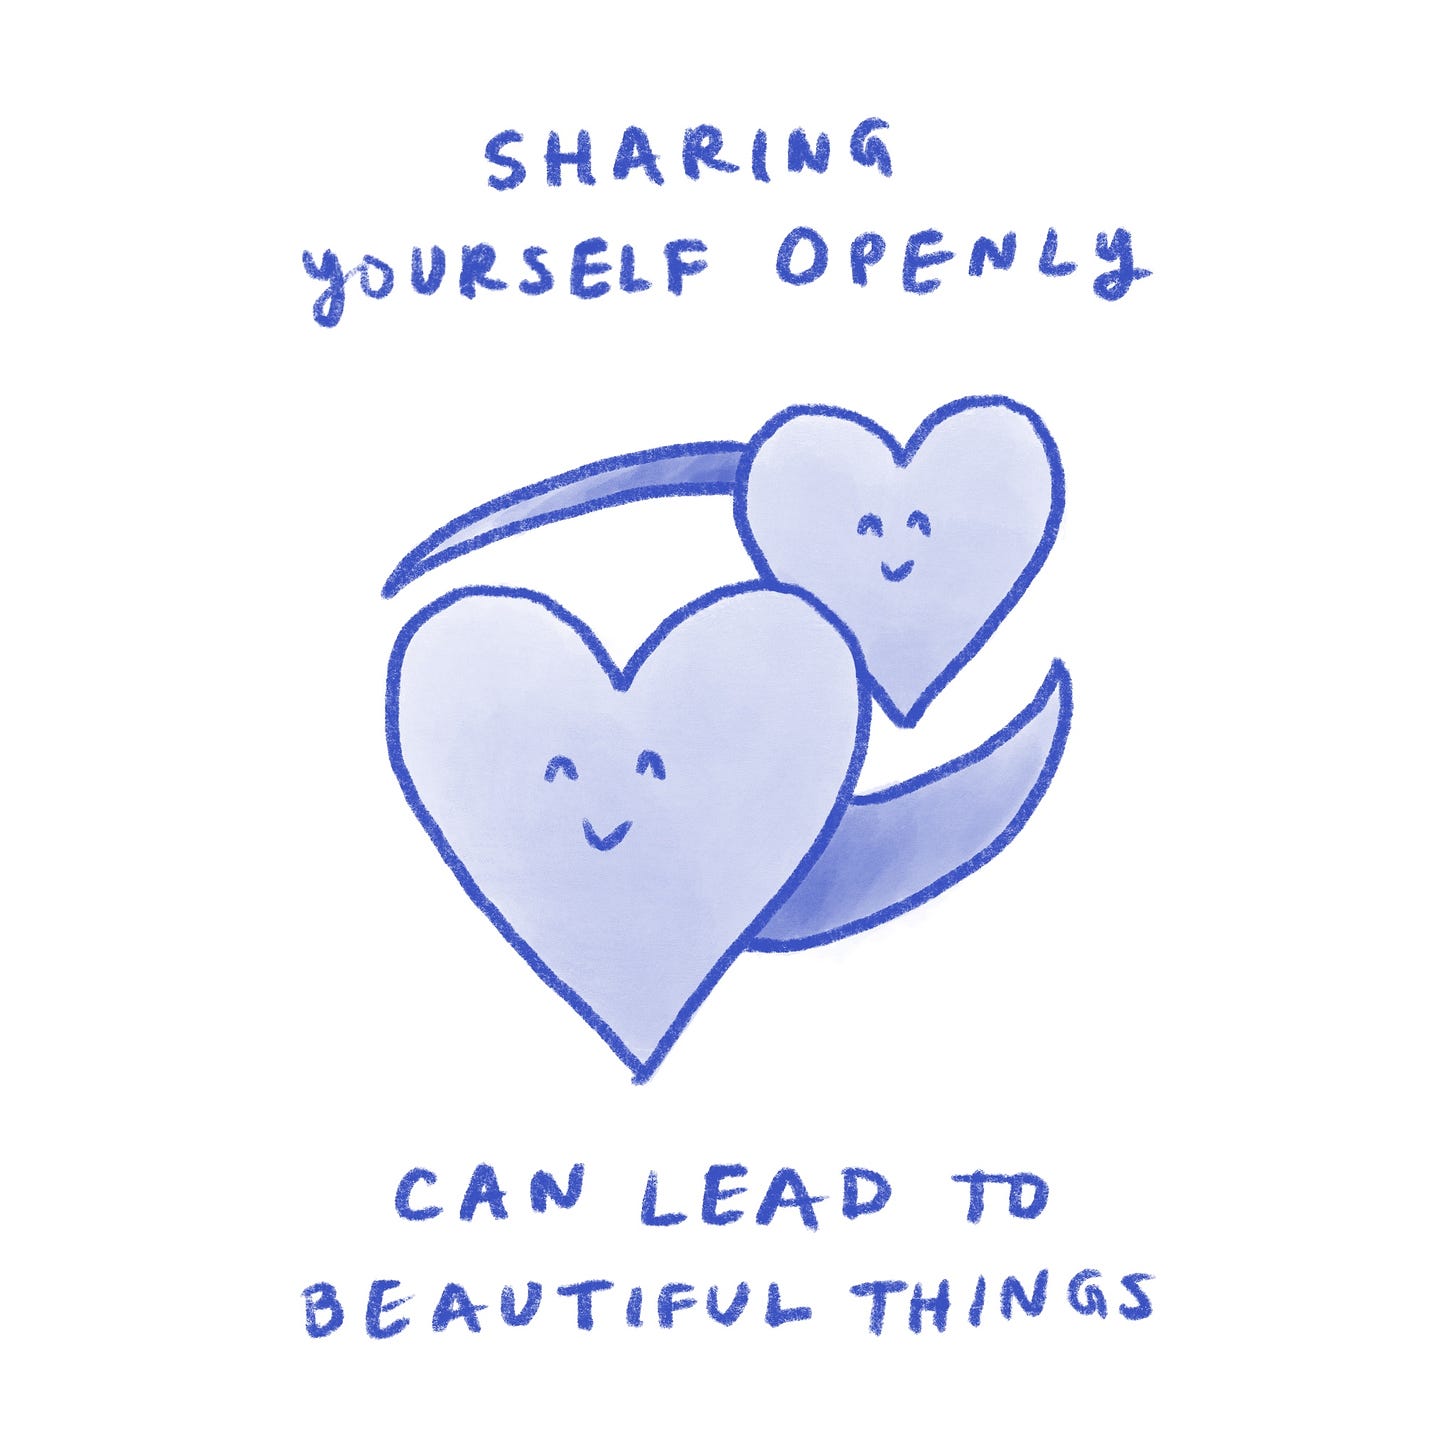 Sharing yourself openly can lead to beautiful things